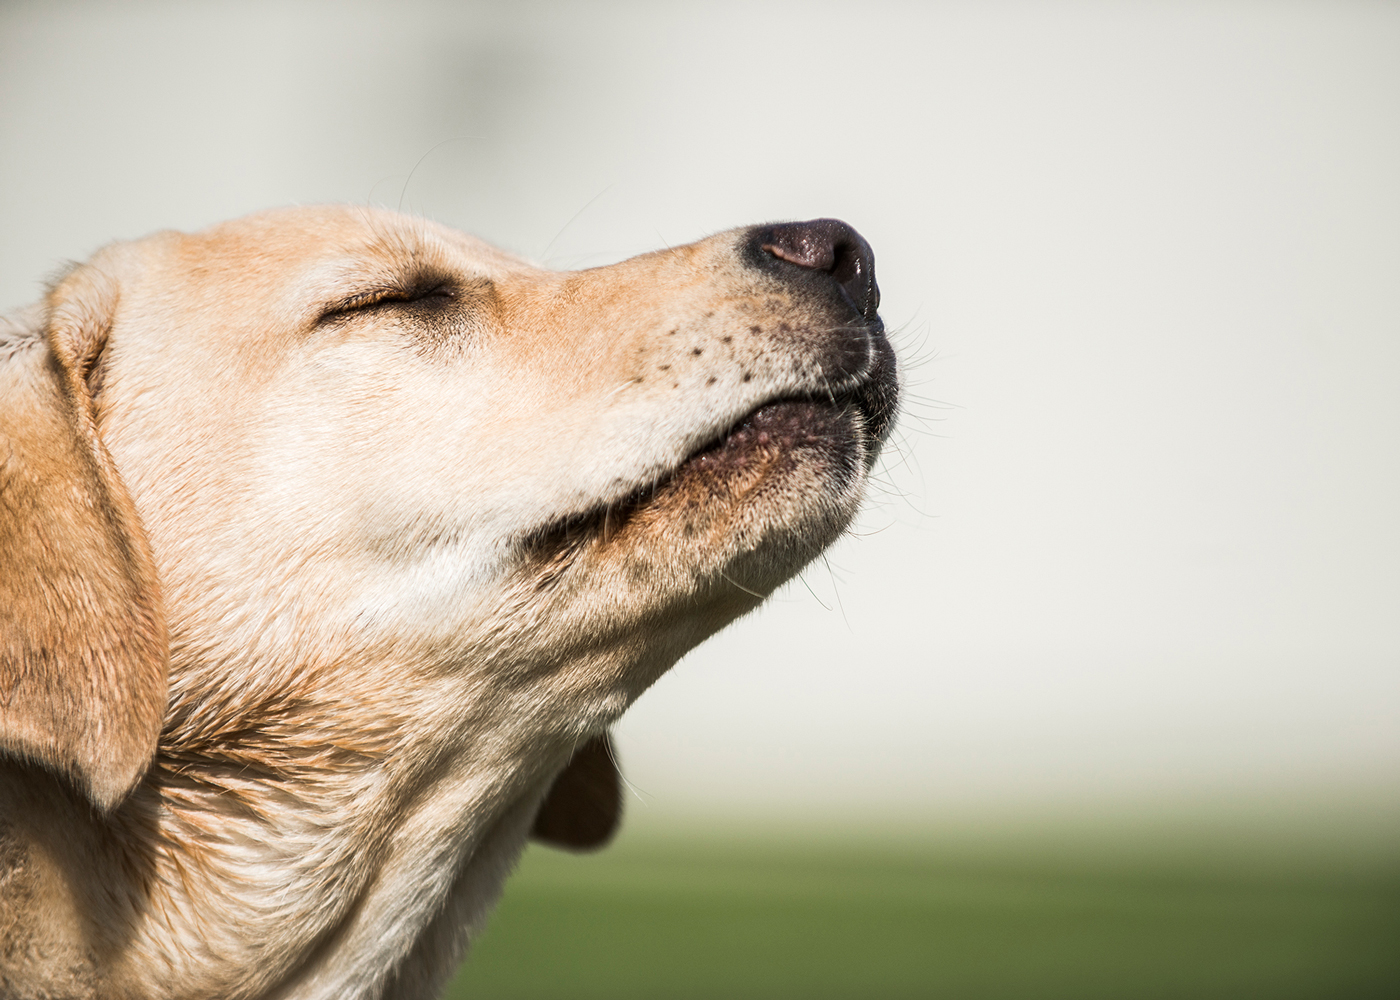 Why do dogs sniff?